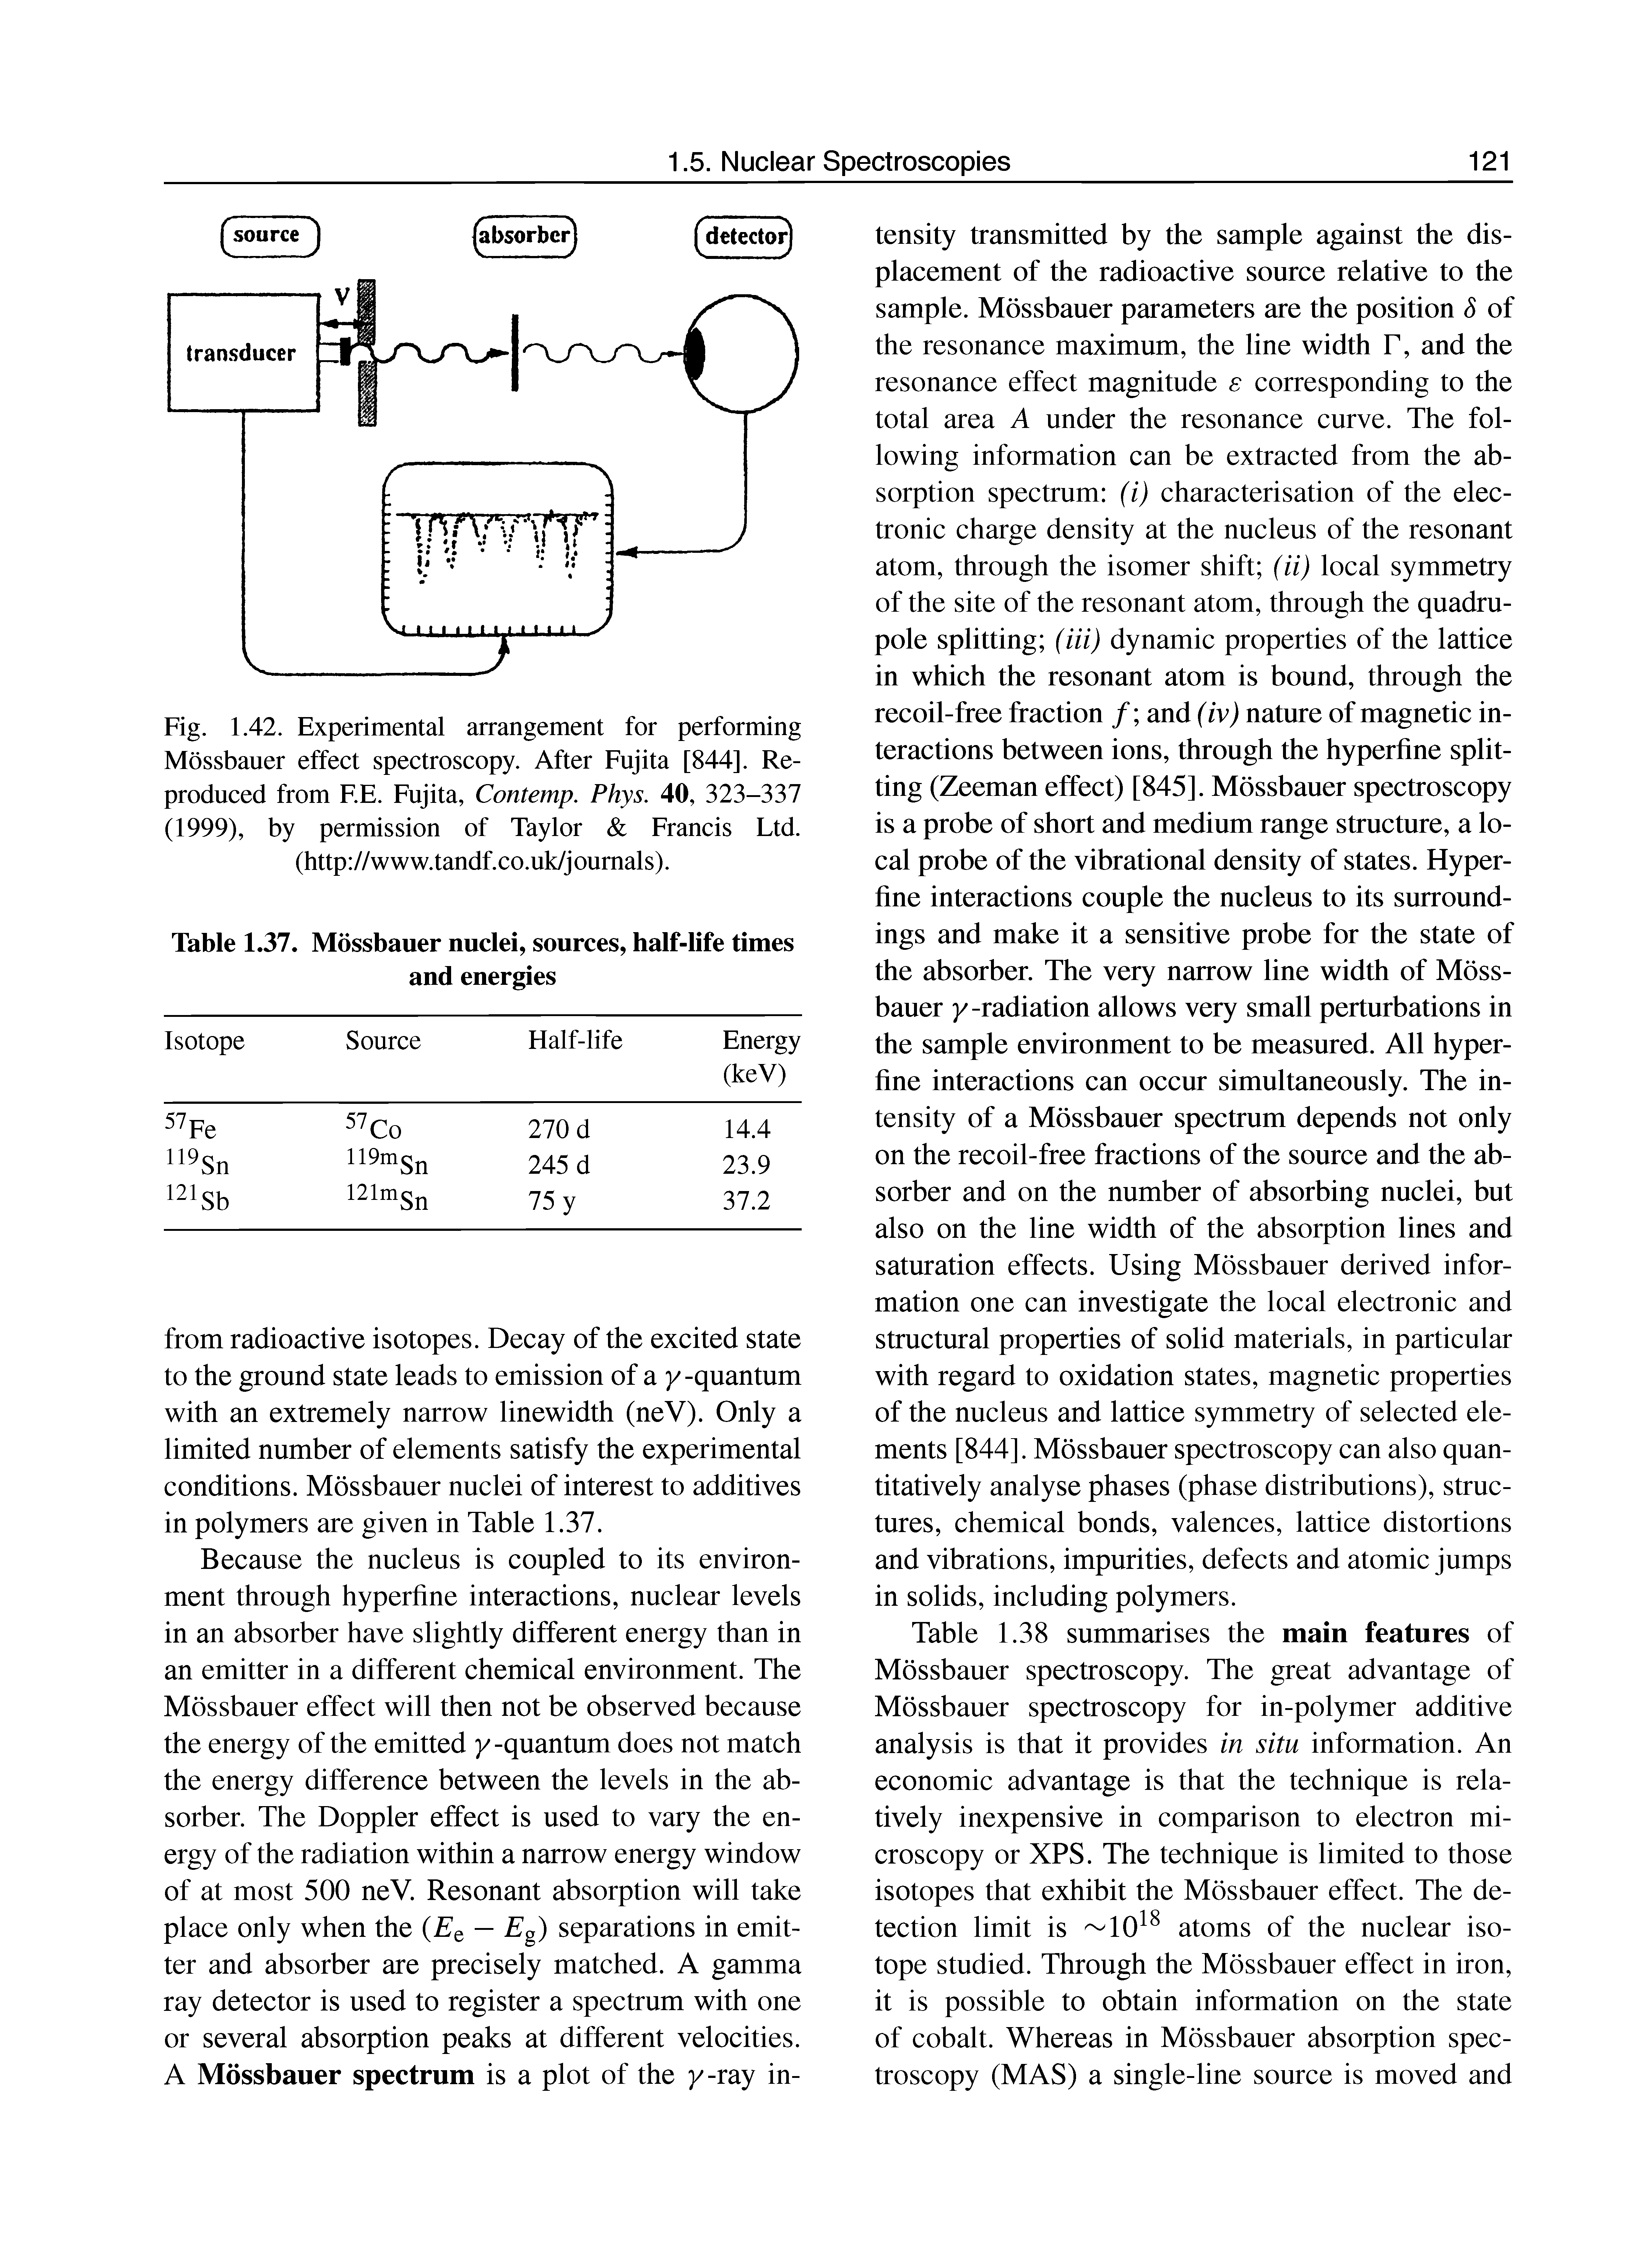 Fig. 1.42. Experimental arrangement for performing Mossbauer effect spectroscopy. After Fujita [844]. Reproduced from F.E. Fujita, Contemp. Phys. 40, 323-337 (1999), by permission of Taylor Francis Ltd. (http //www.tandf.co.uk/journals).